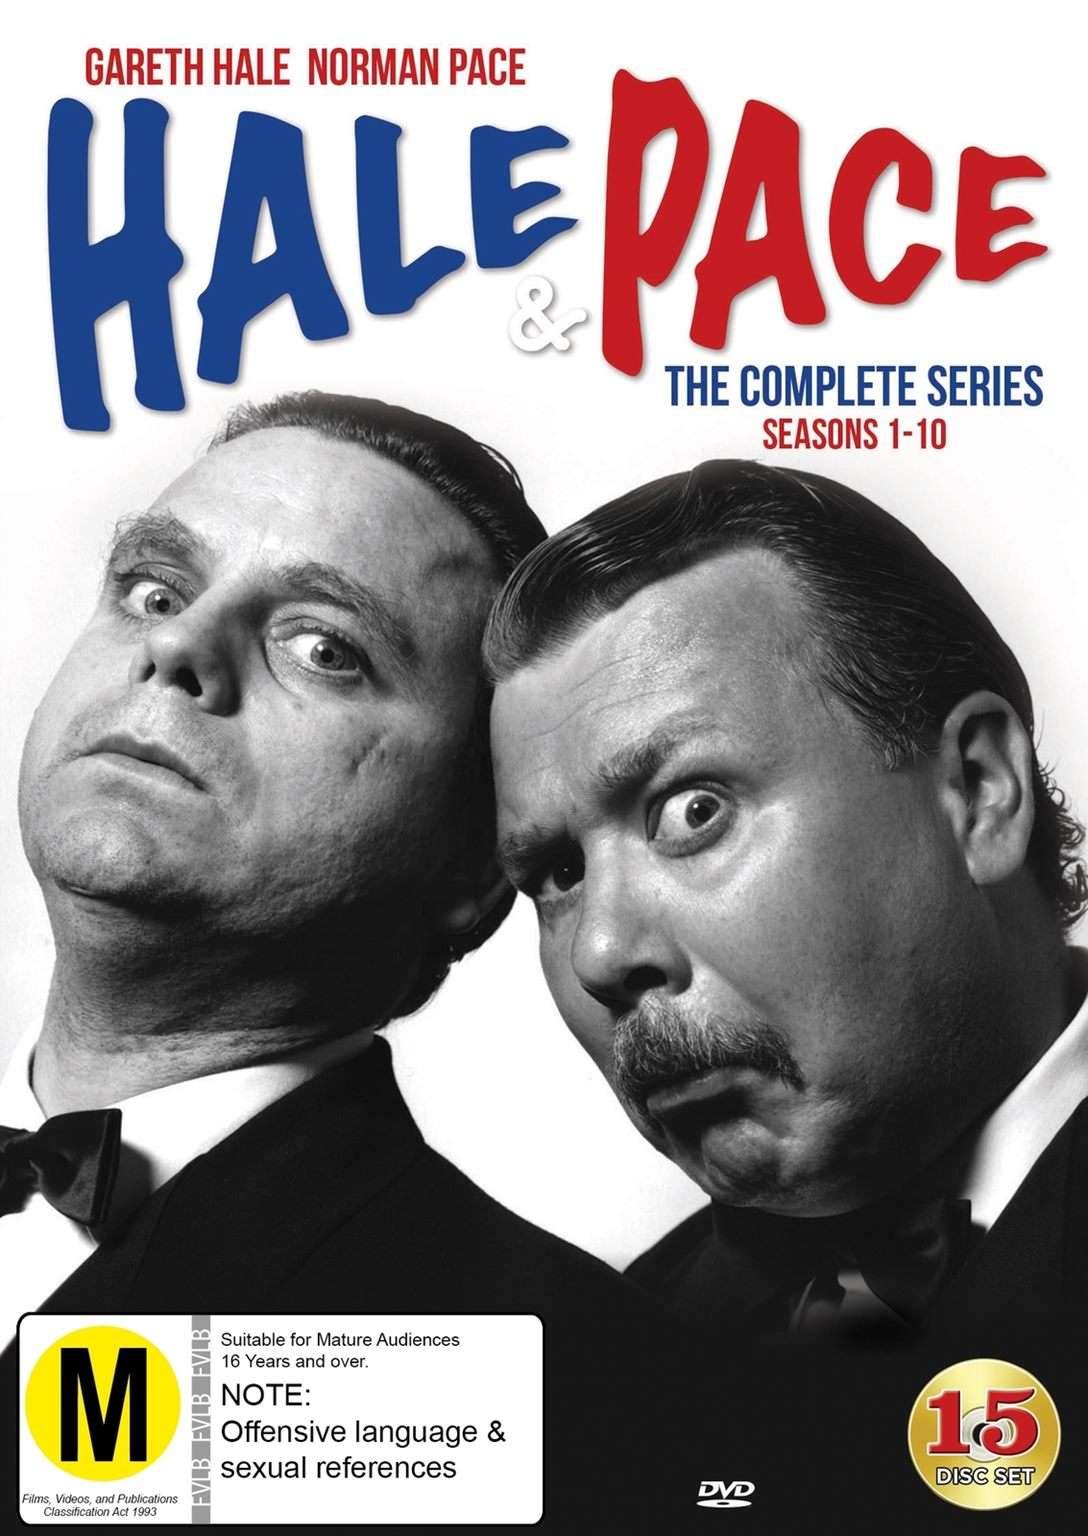 Hale & Pace: The Complete Series Collection Seasons 1-10 15 Disc Set Brand New